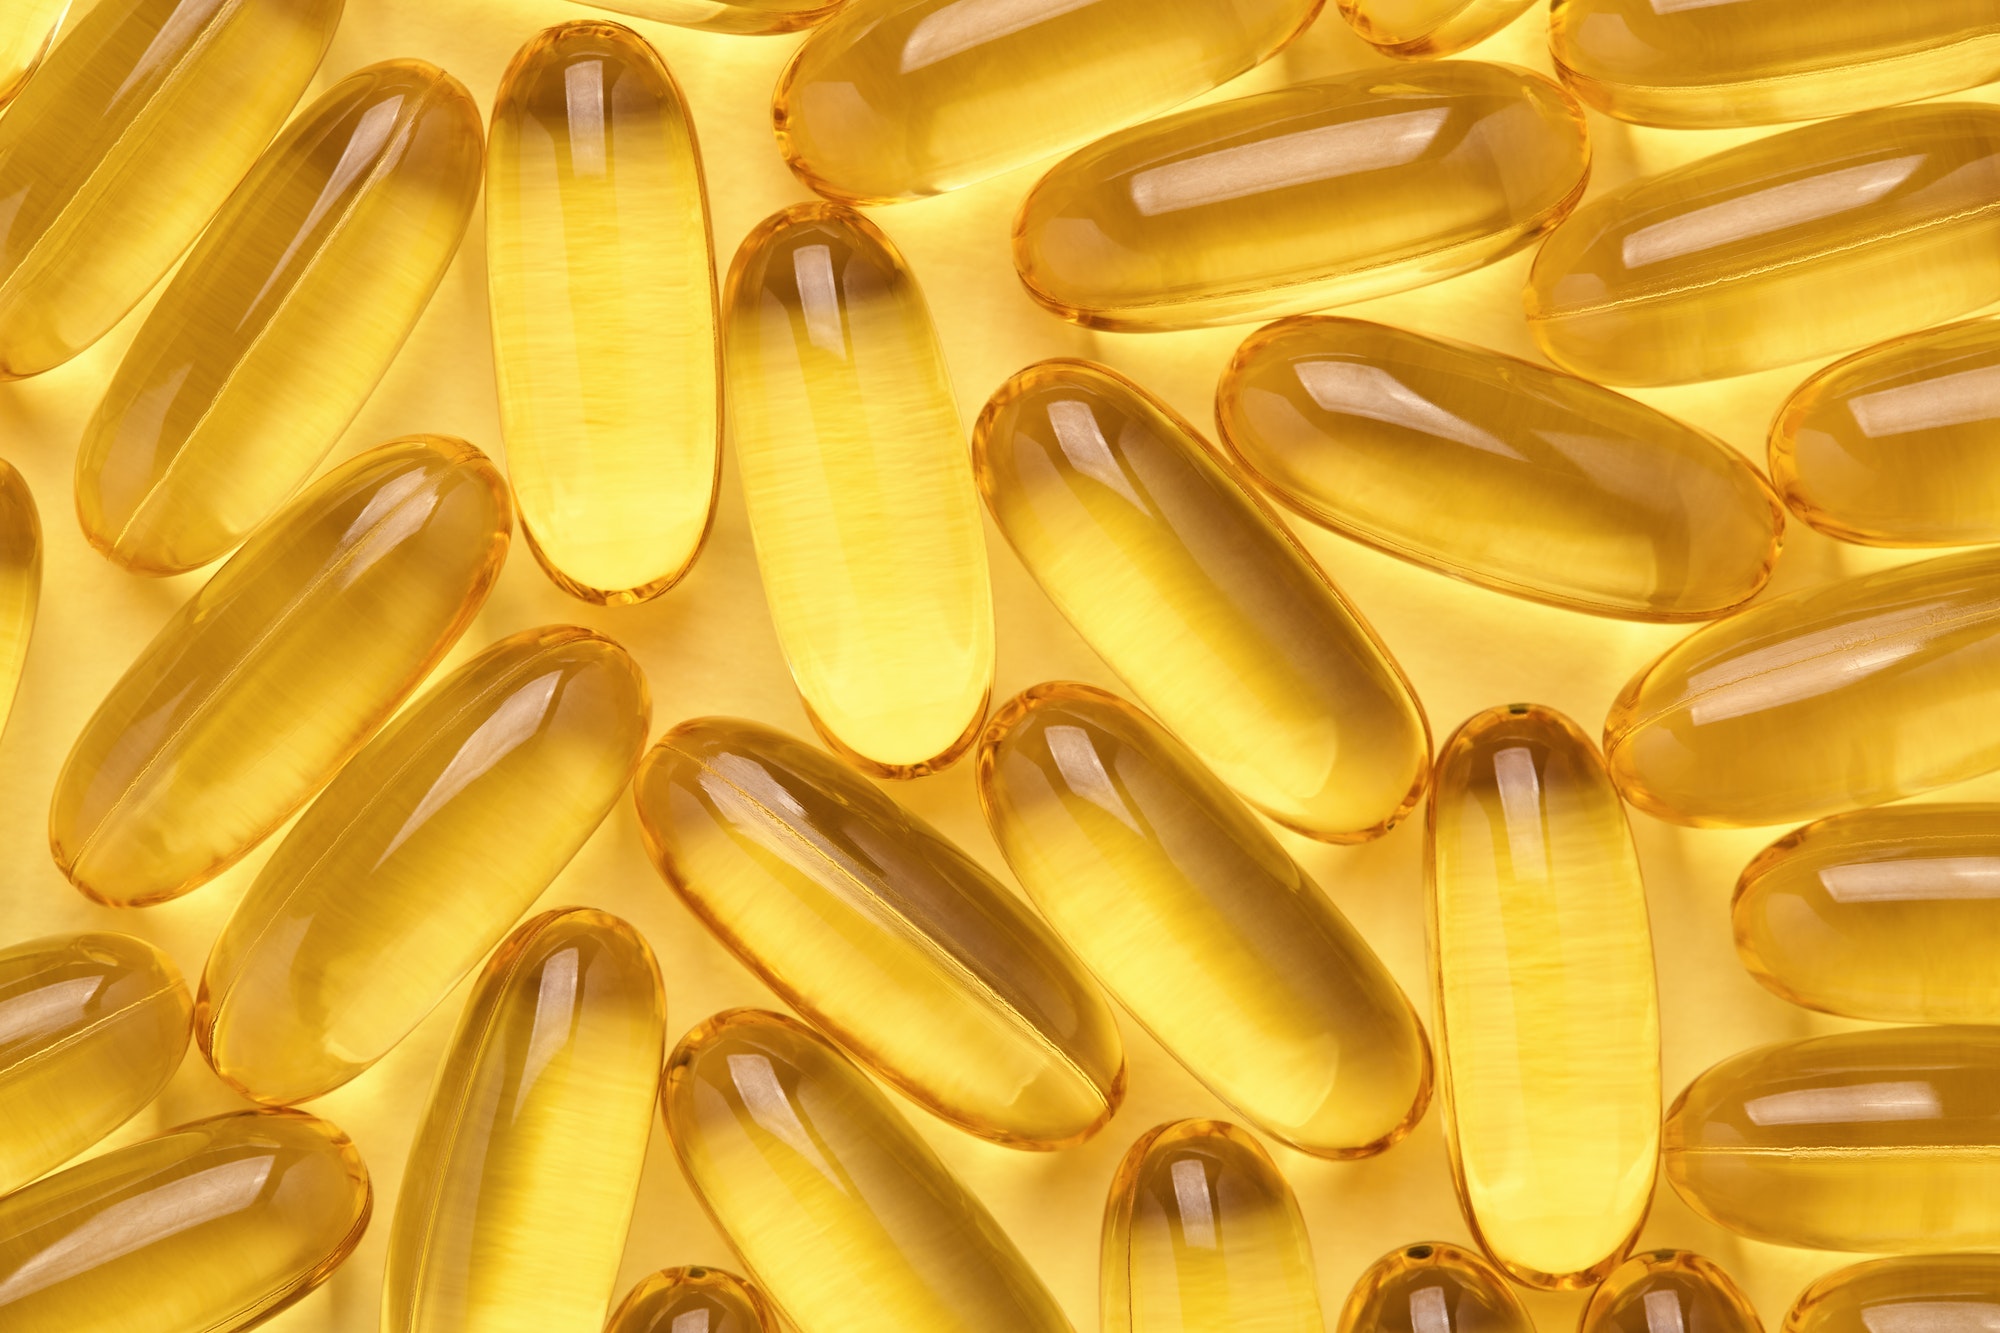 Omega 3 Softgels, Fish Oil Capsules, Yellow Pills Abstract Background.